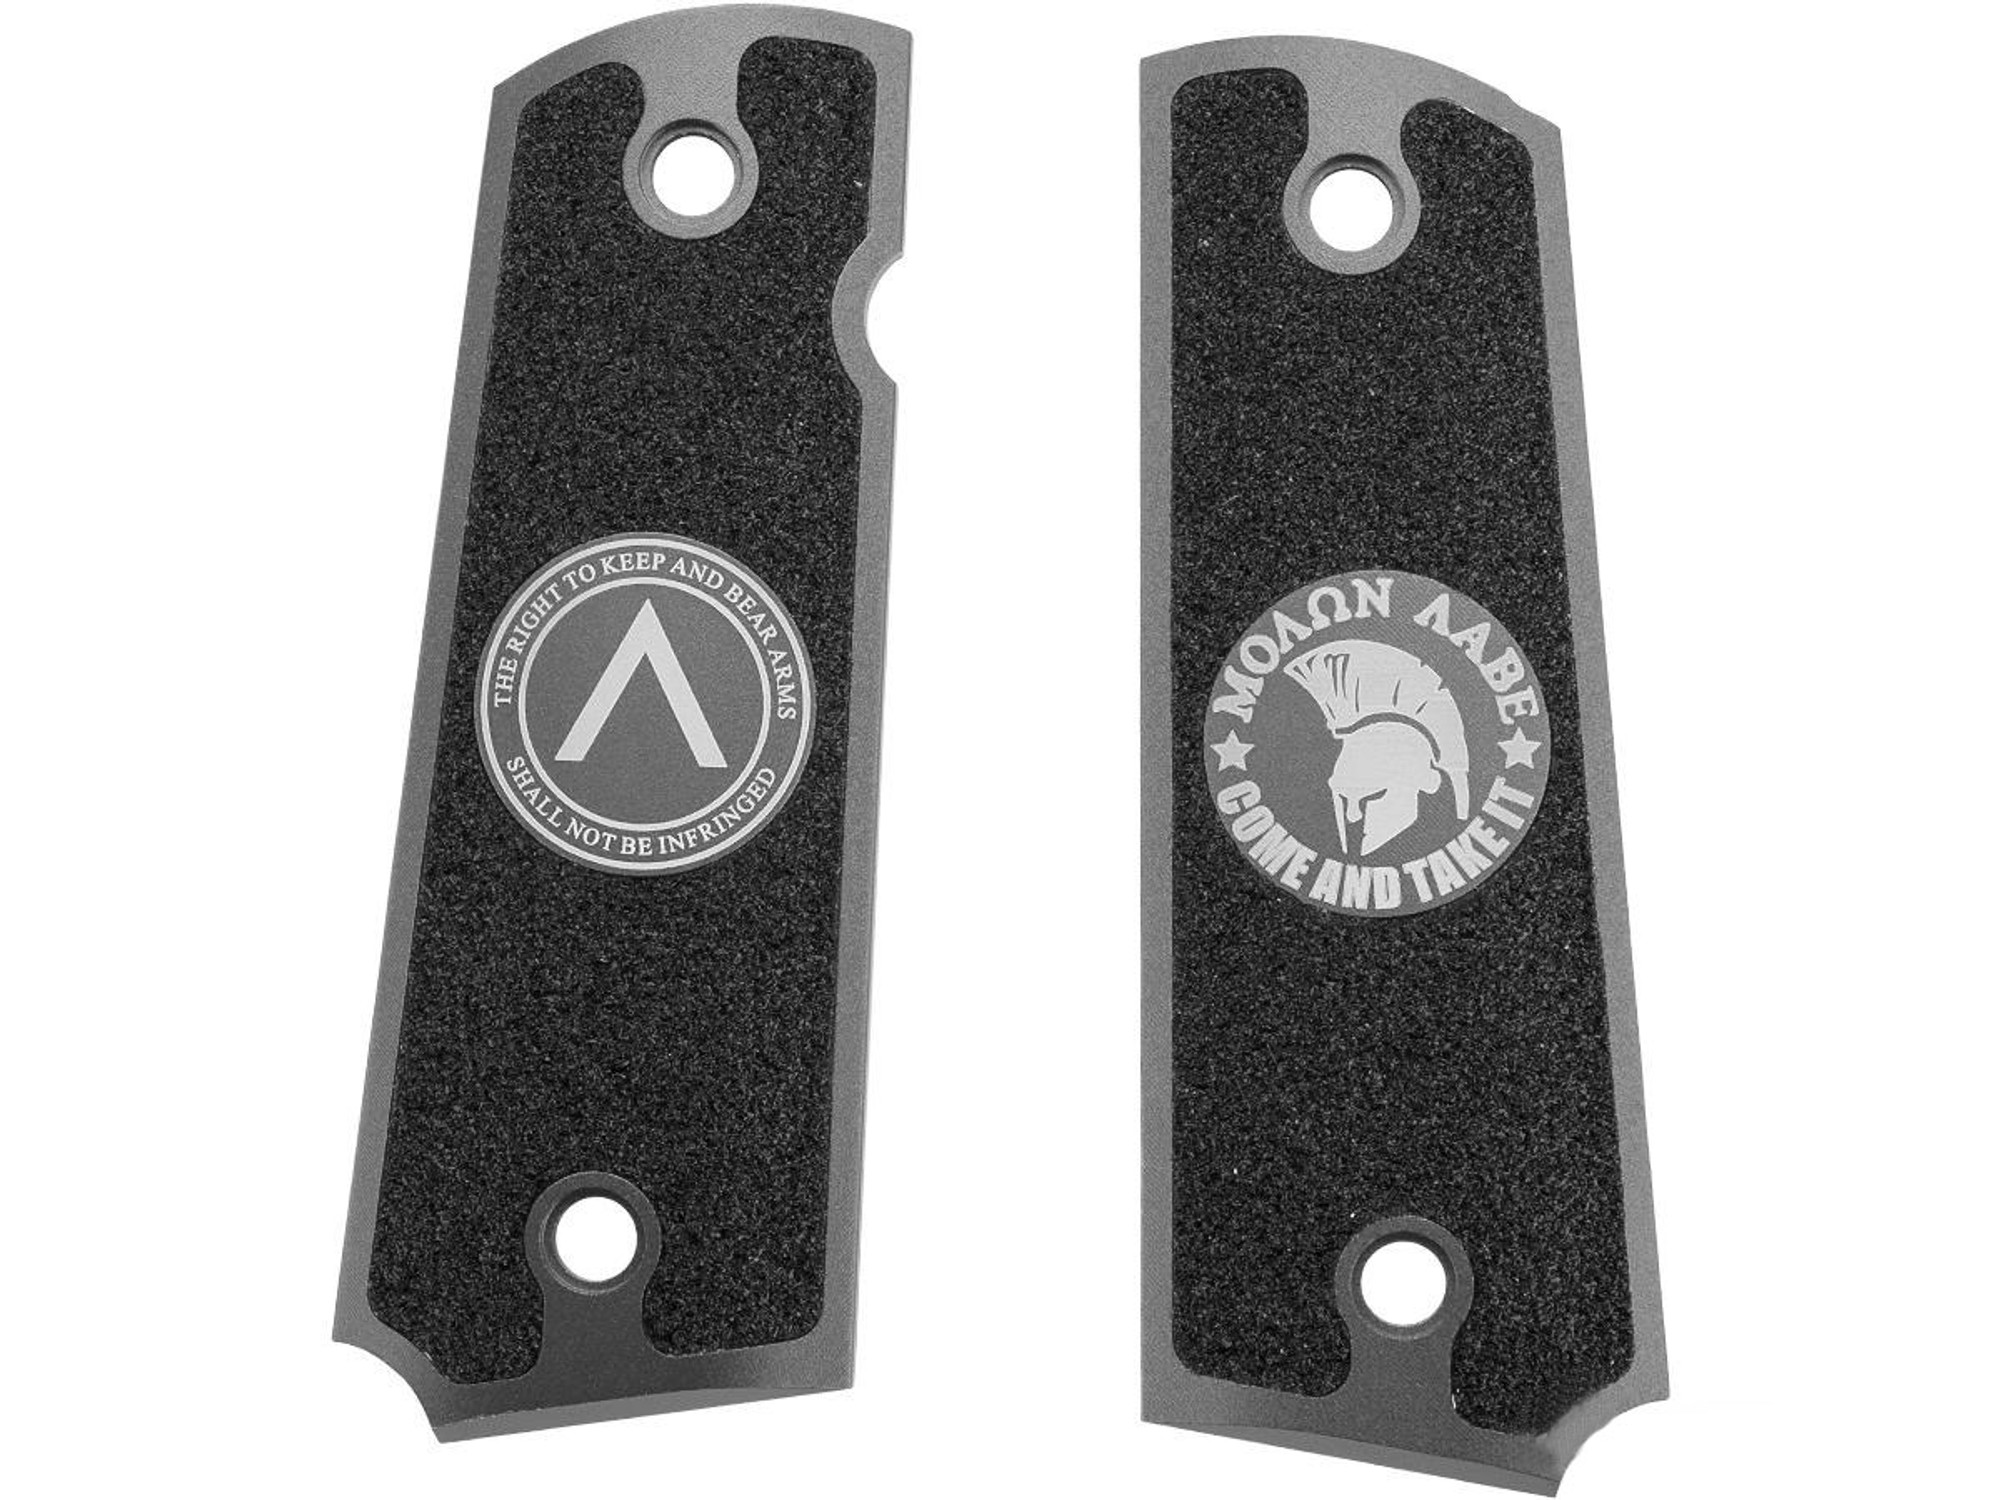 Angel Custom CNC Machined Tac-Glove Universal Grips for 1911 Series Airsoft Pistols (Color: Dark Grey / Molon labe)